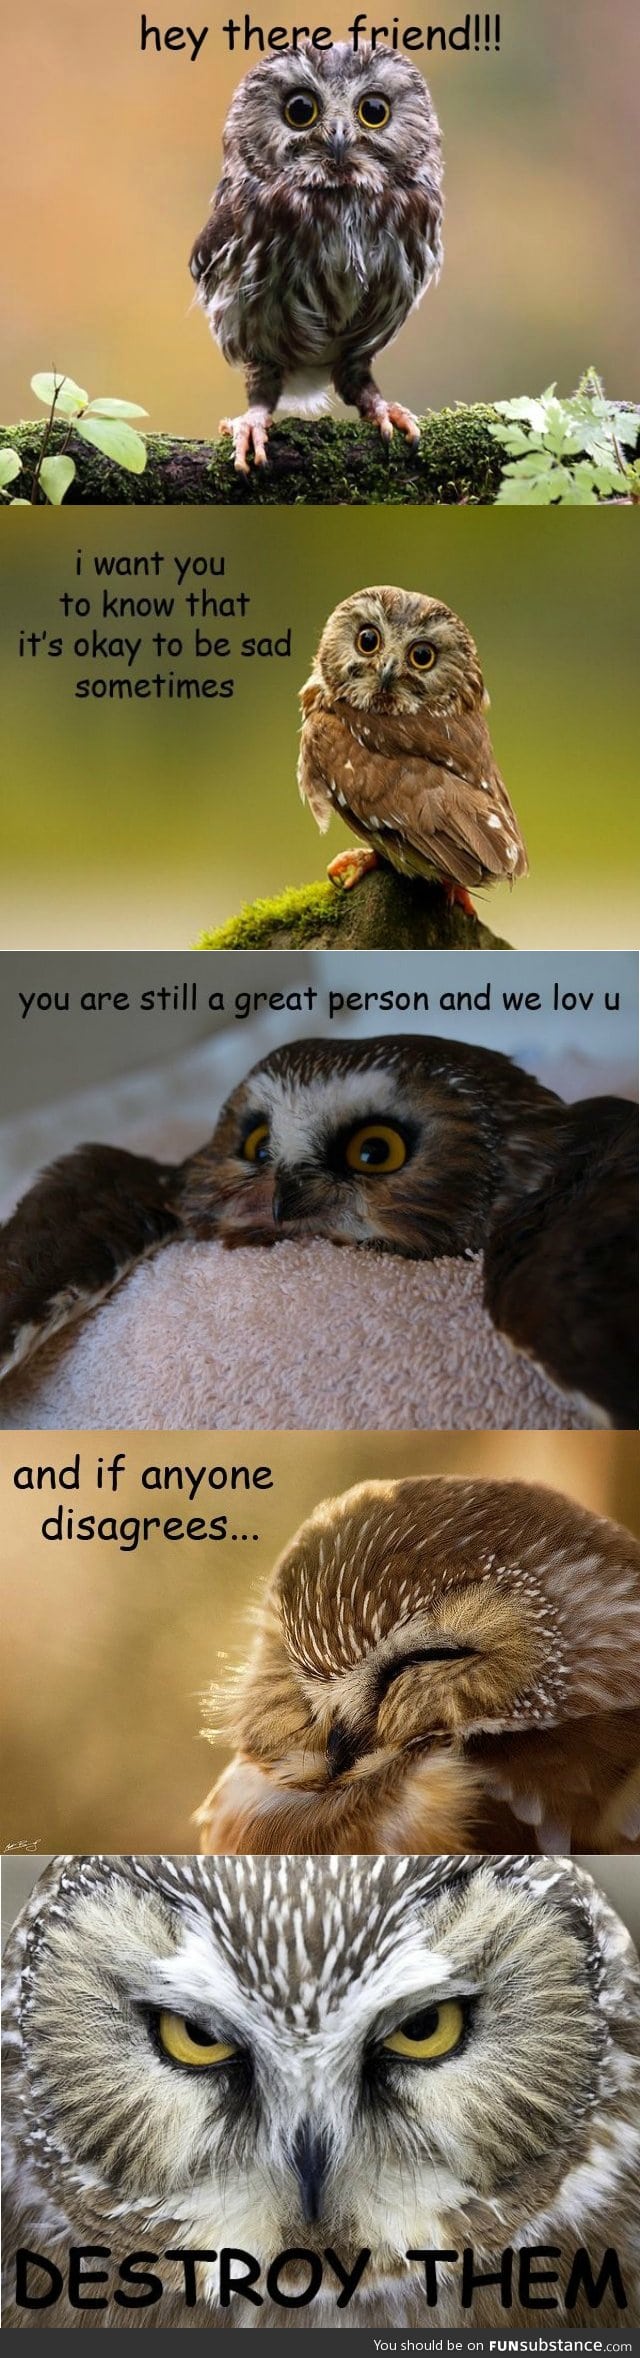 A message from the owls